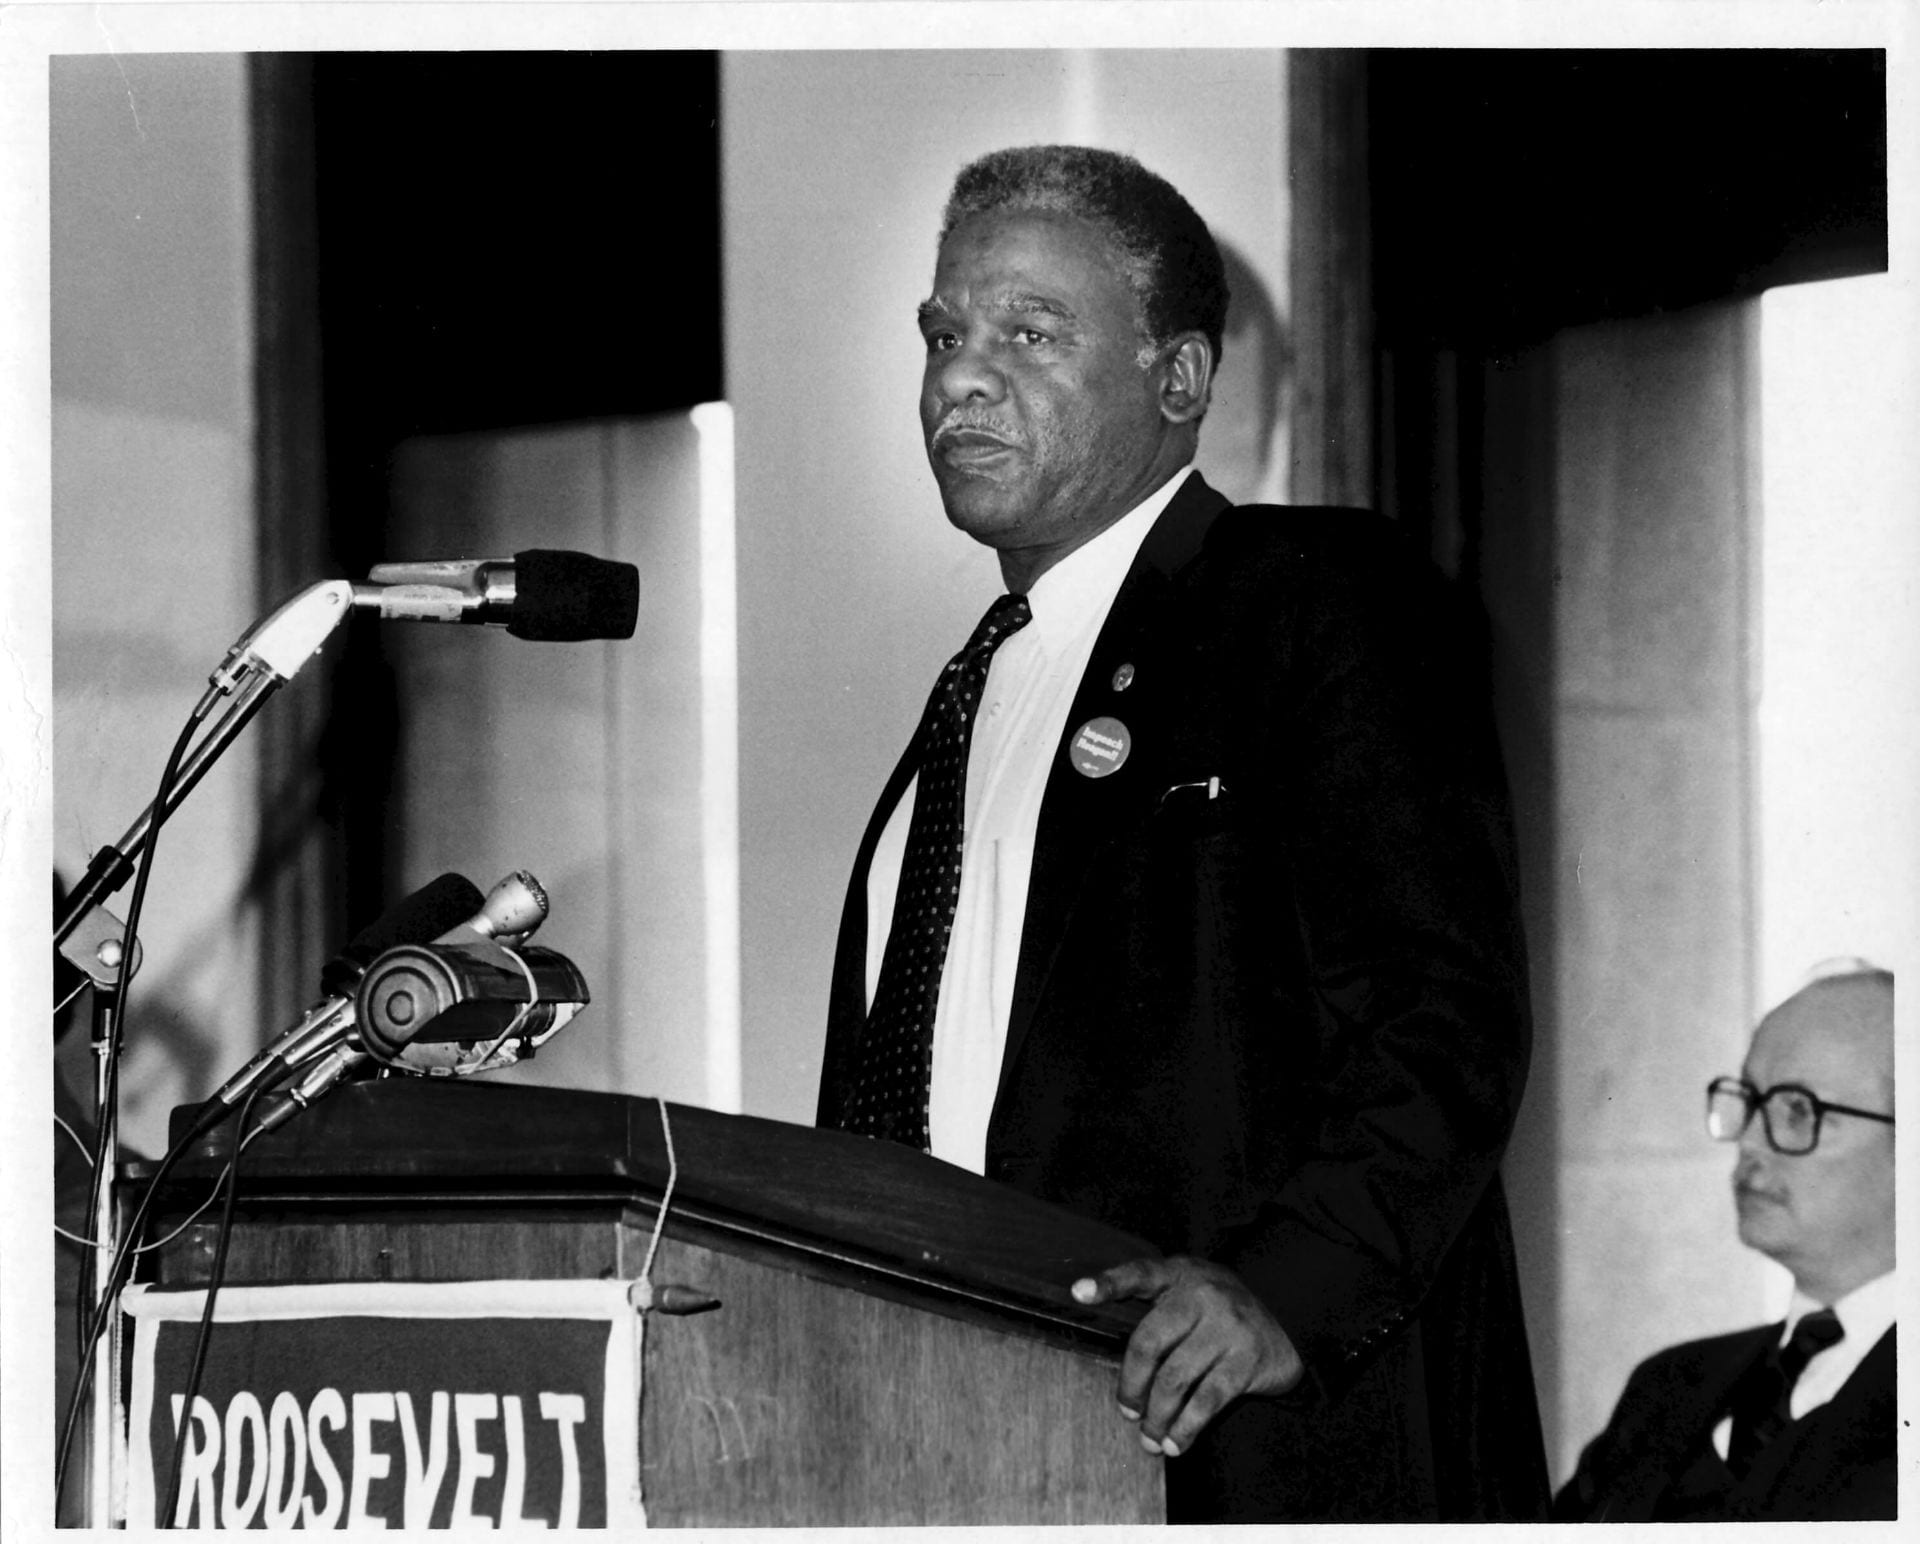 Harold Washington returns to Roosevelt’s campus to give a speech during his mayoral campaign